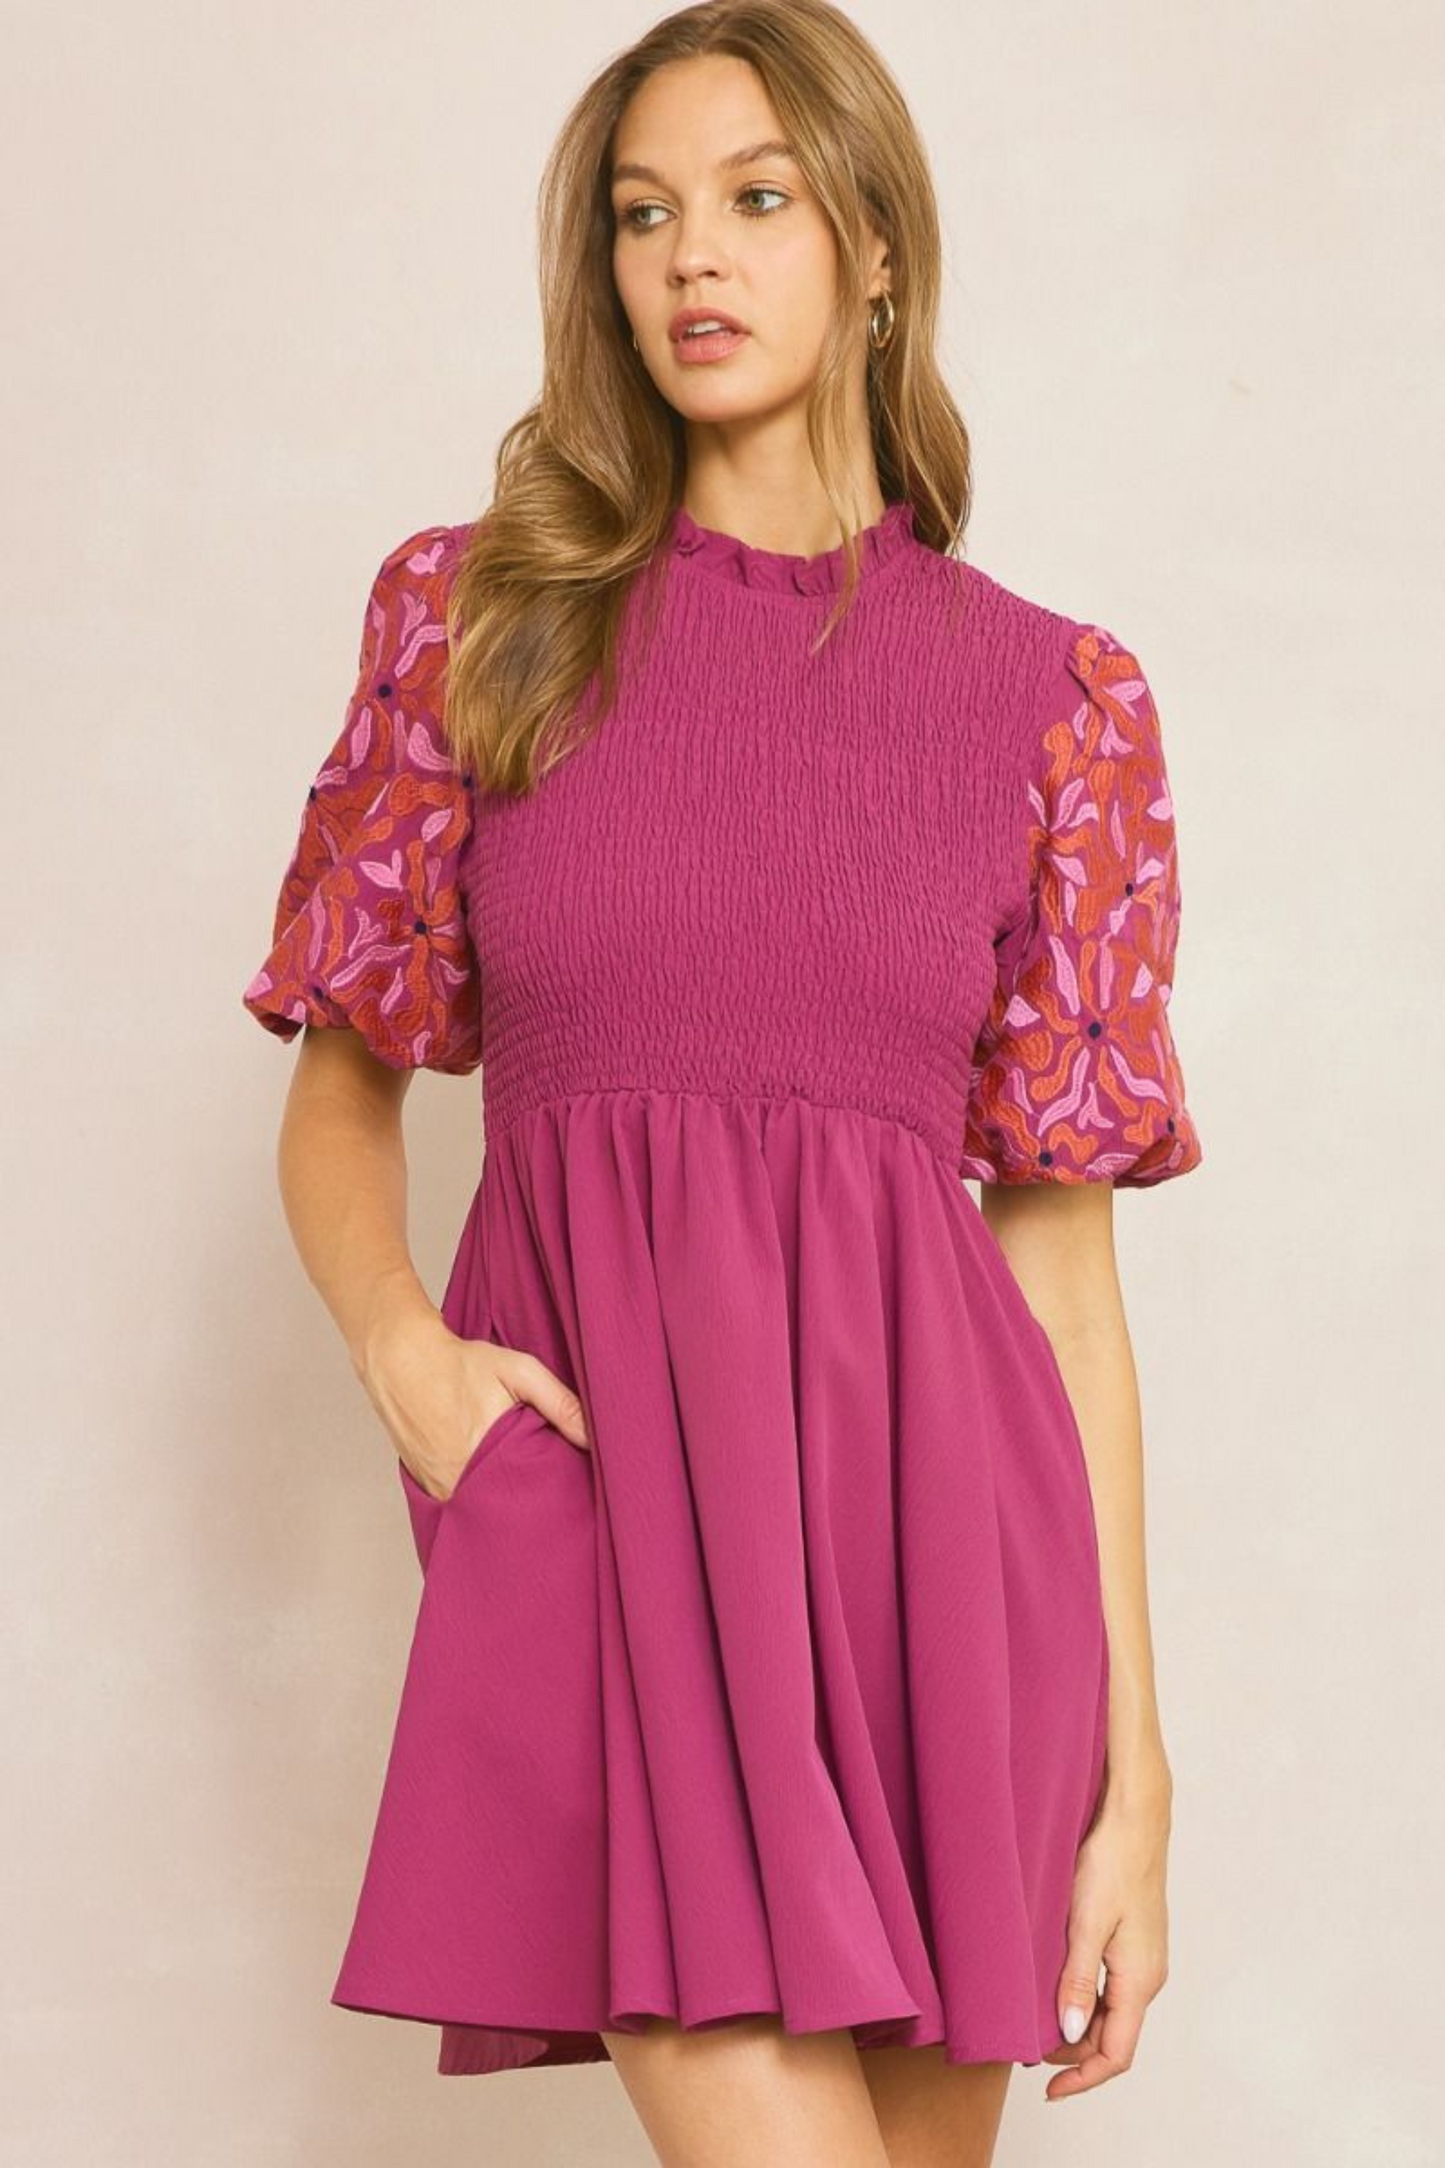 Chic Bubble Sleeve Dress - Simply Polished Boutique